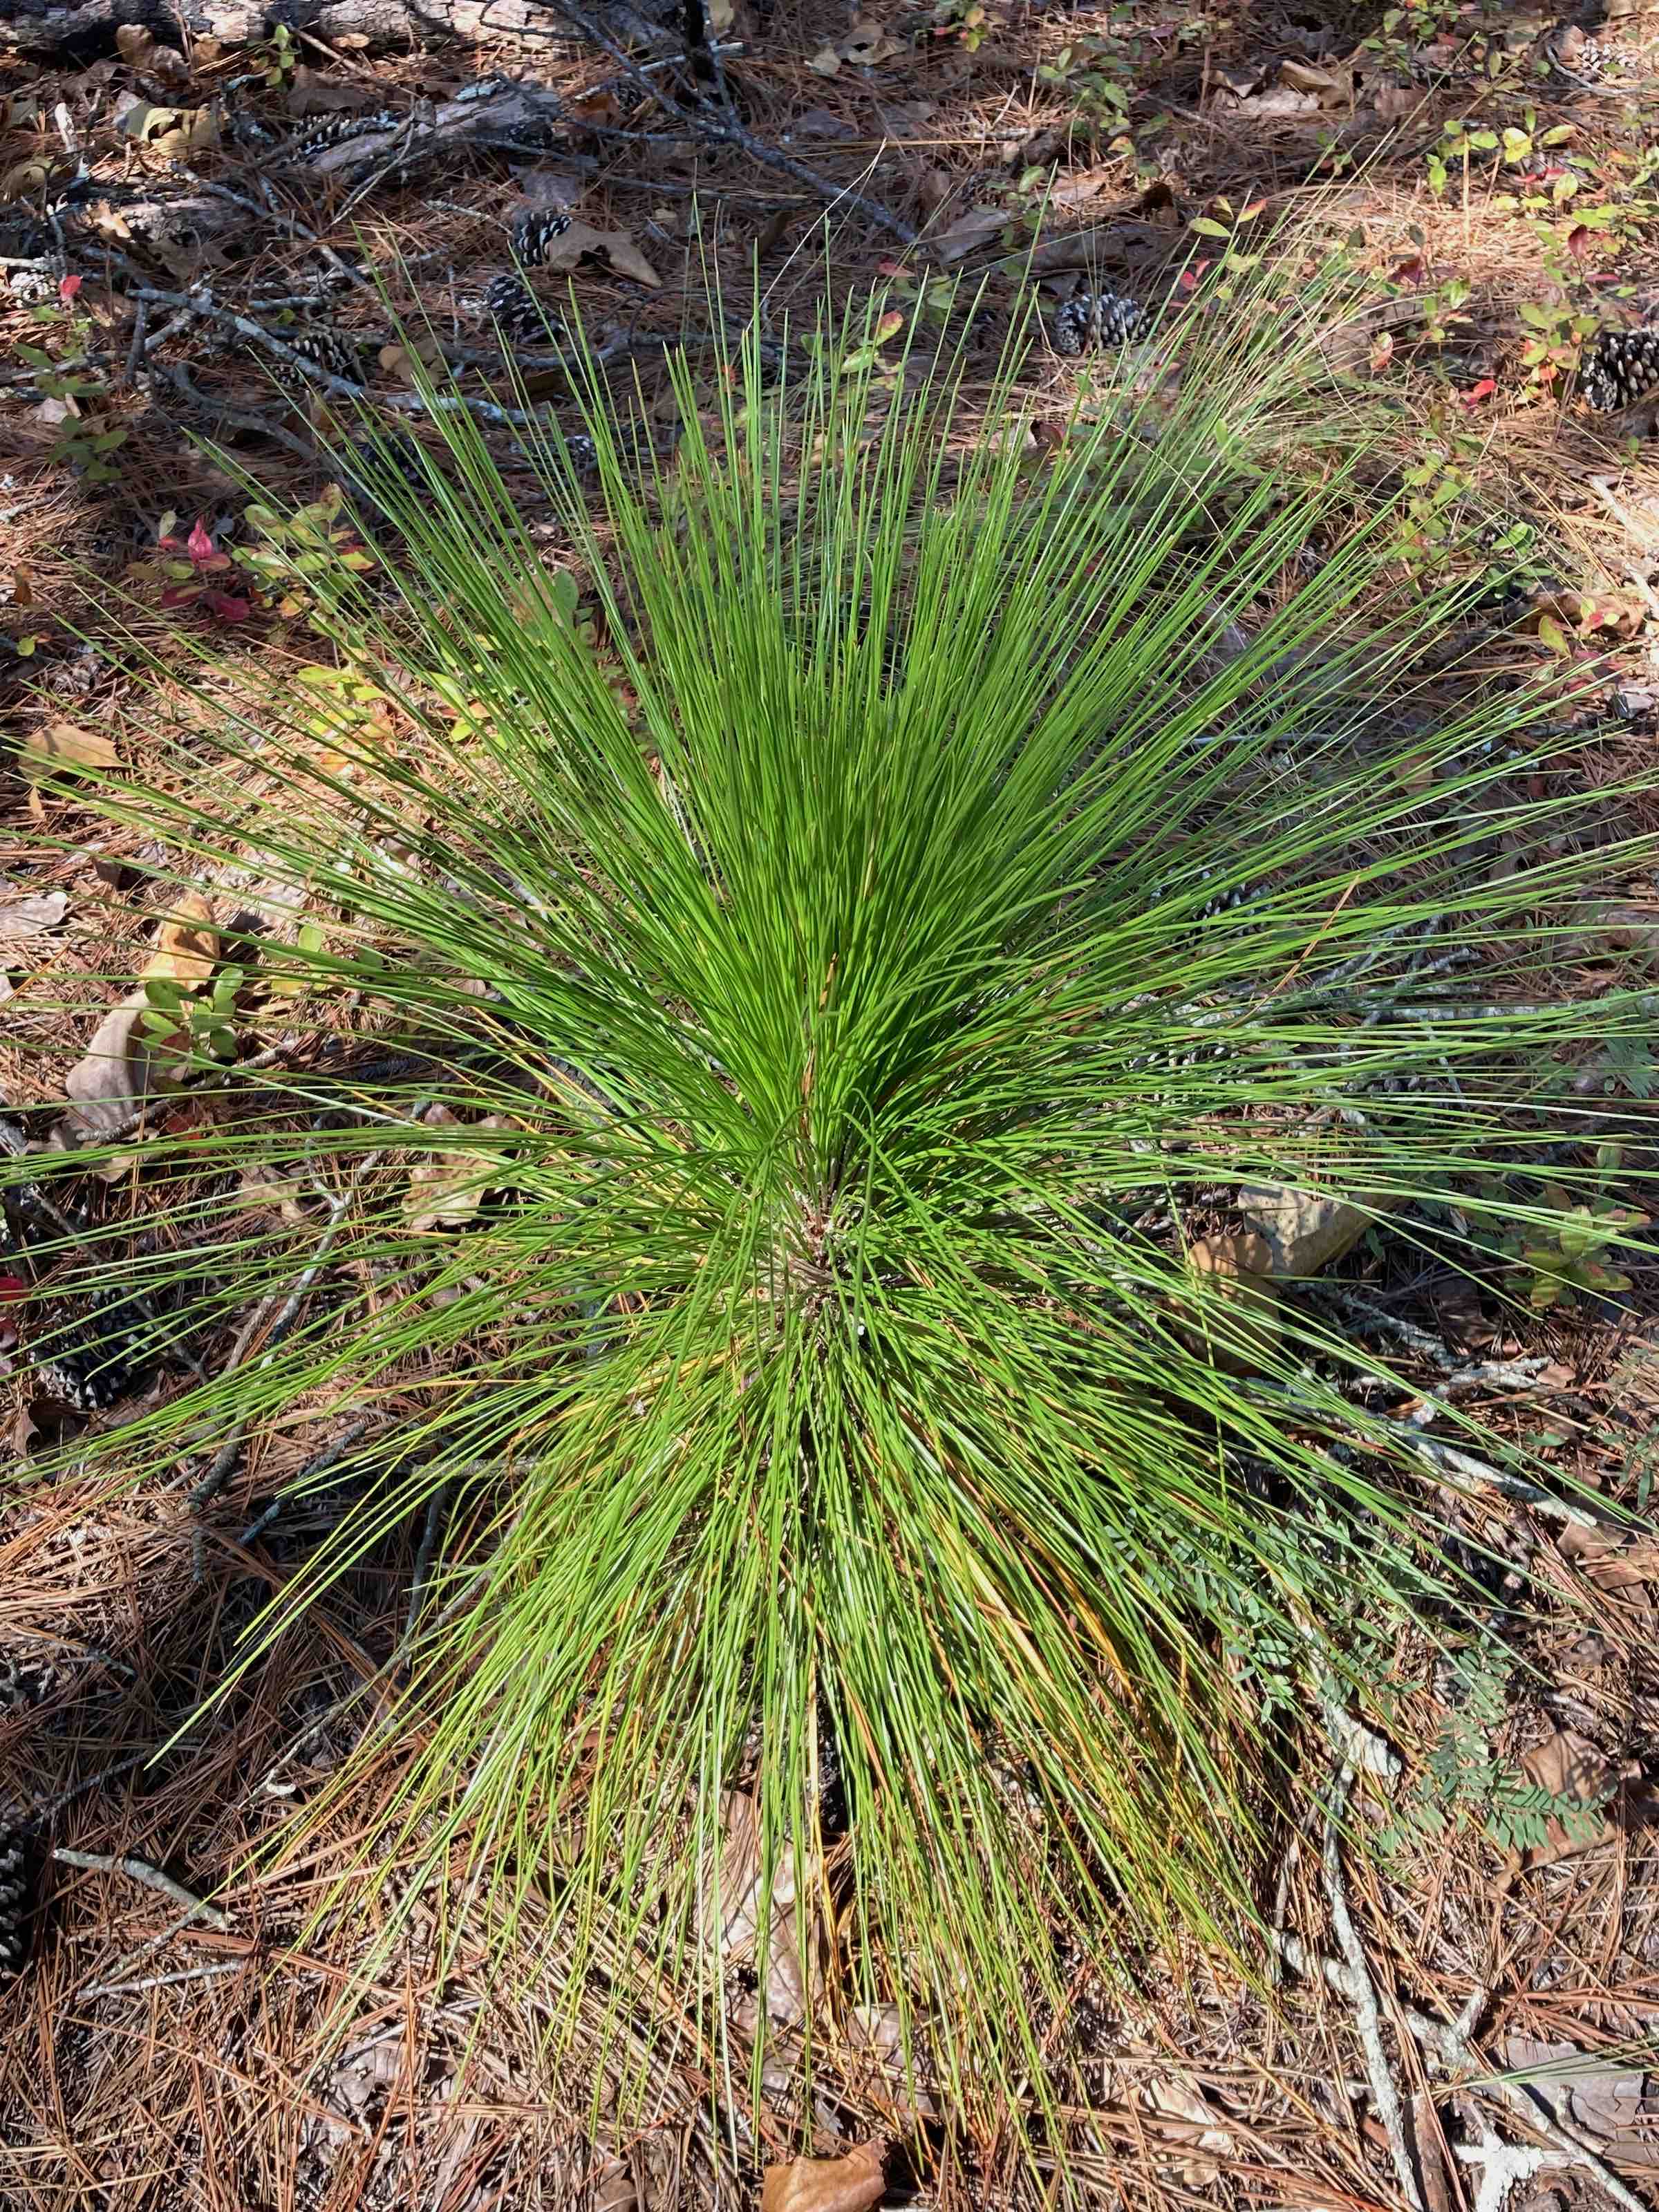 The Scientific Name is Pinus palustris. You will likely hear them called Longleaf Pine, Southern Pine. This picture shows the The 